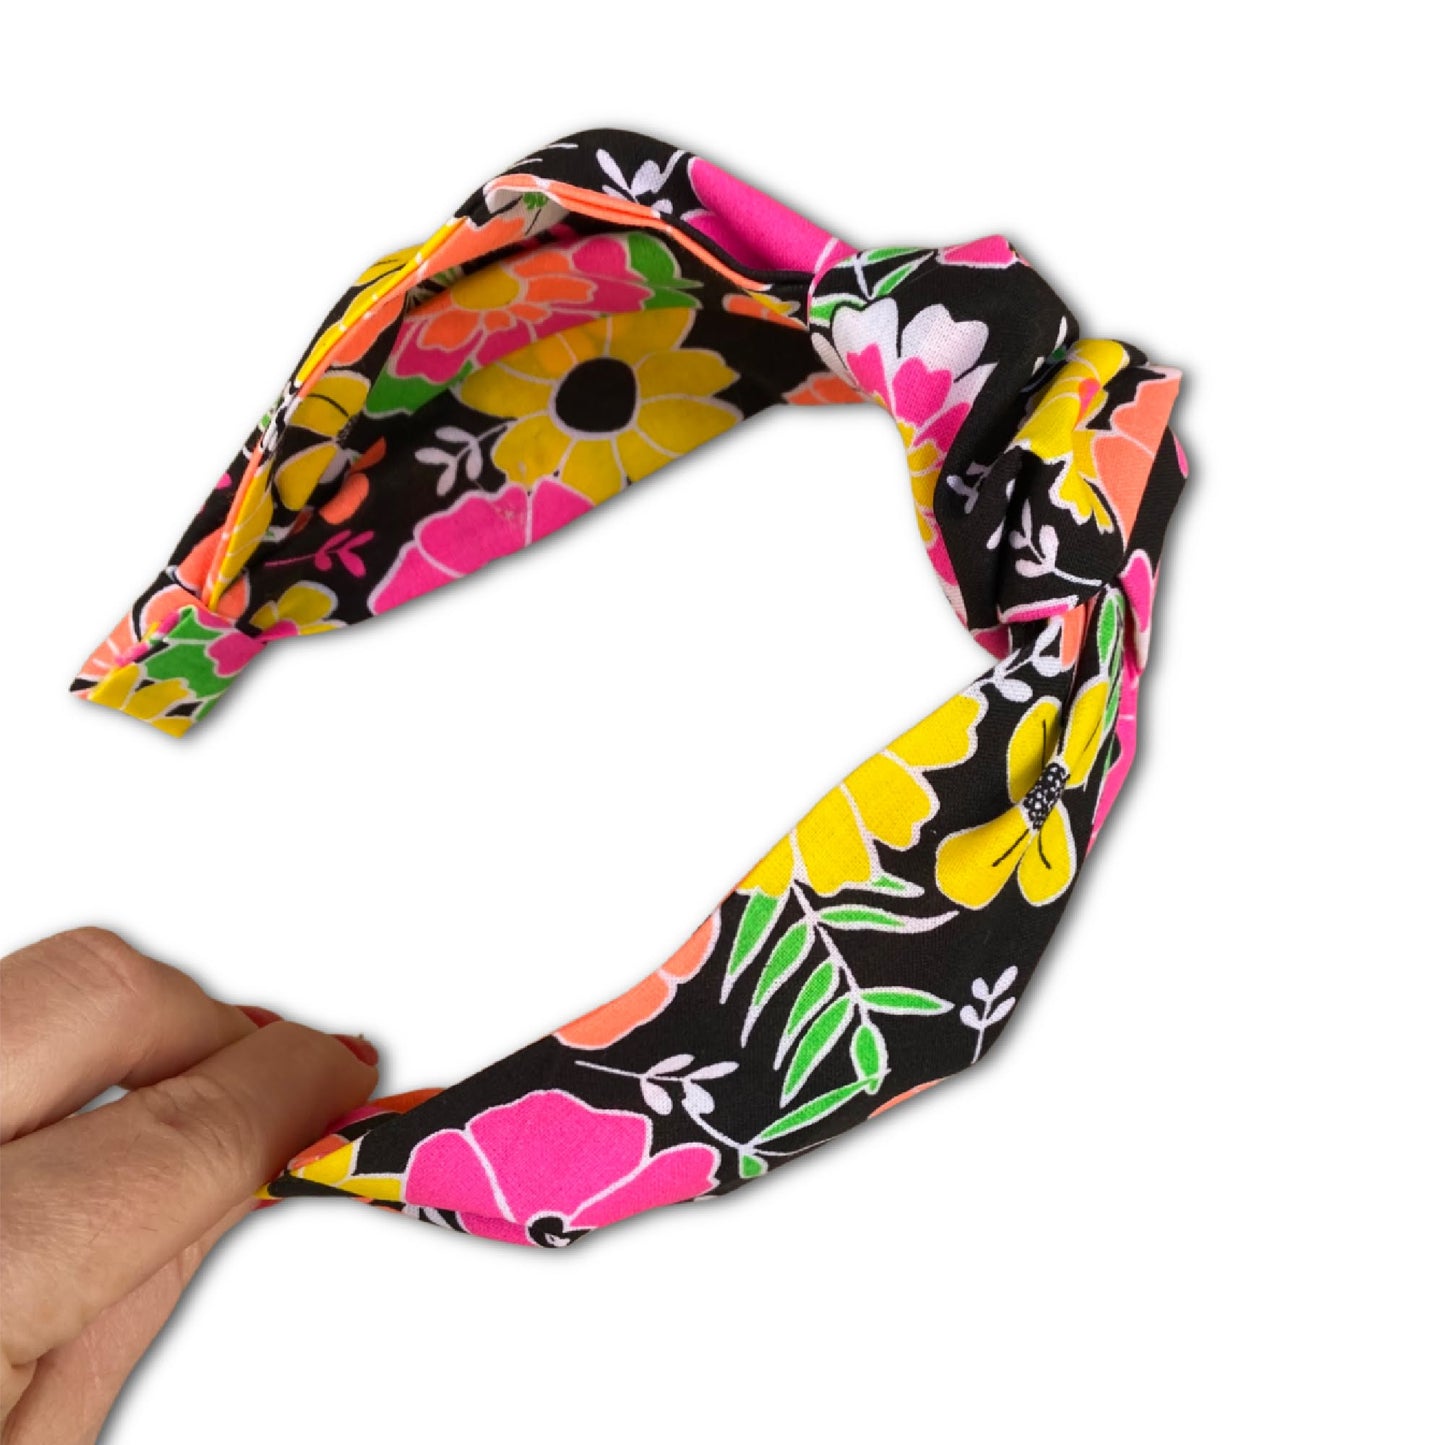 Top knot styled headband with bright neon colored flowers. This hair accessory has a 